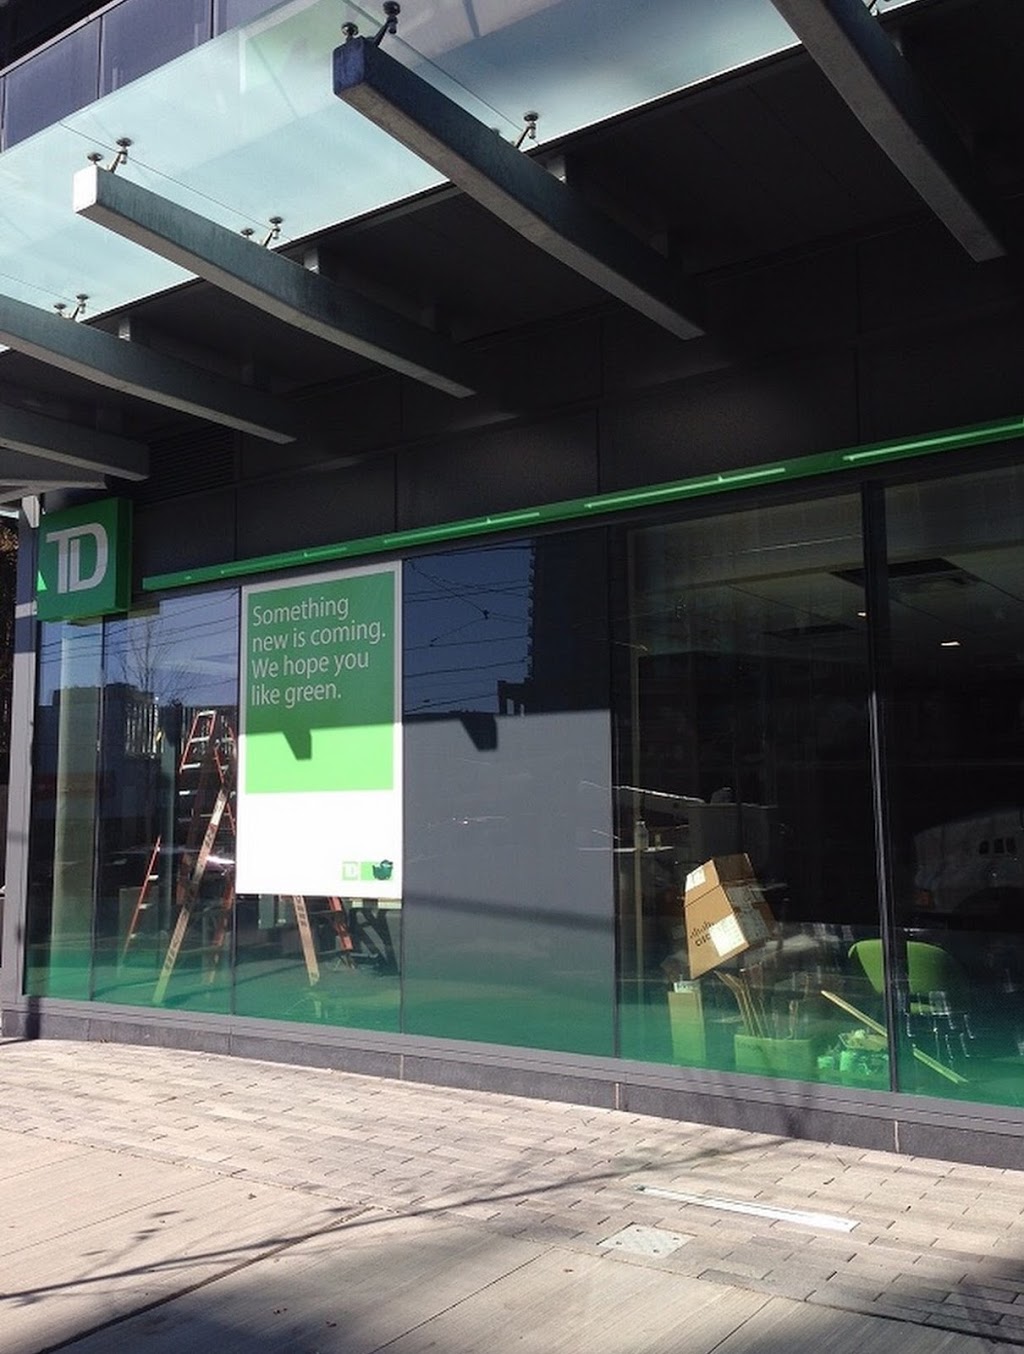 TD Canada Trust Branch and ATM | atm | 510 St Clair Ave W, Toronto, ON M6C 1A2, Canada | 4166533507 OR +1 416-653-3507